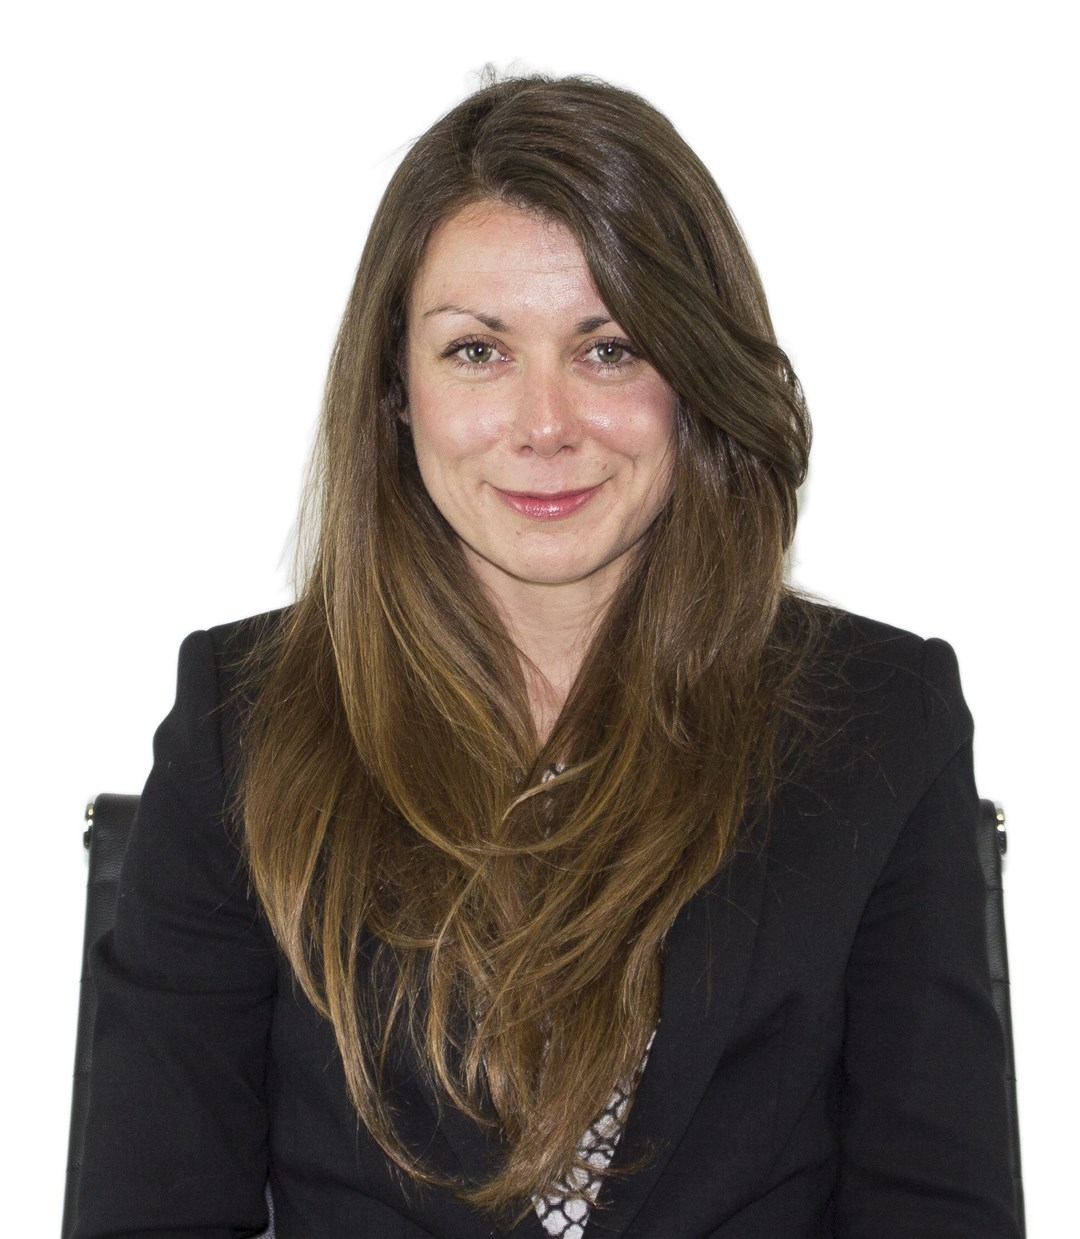 Julie Doncaster is a Partner in the private client team at Harper Macleod.